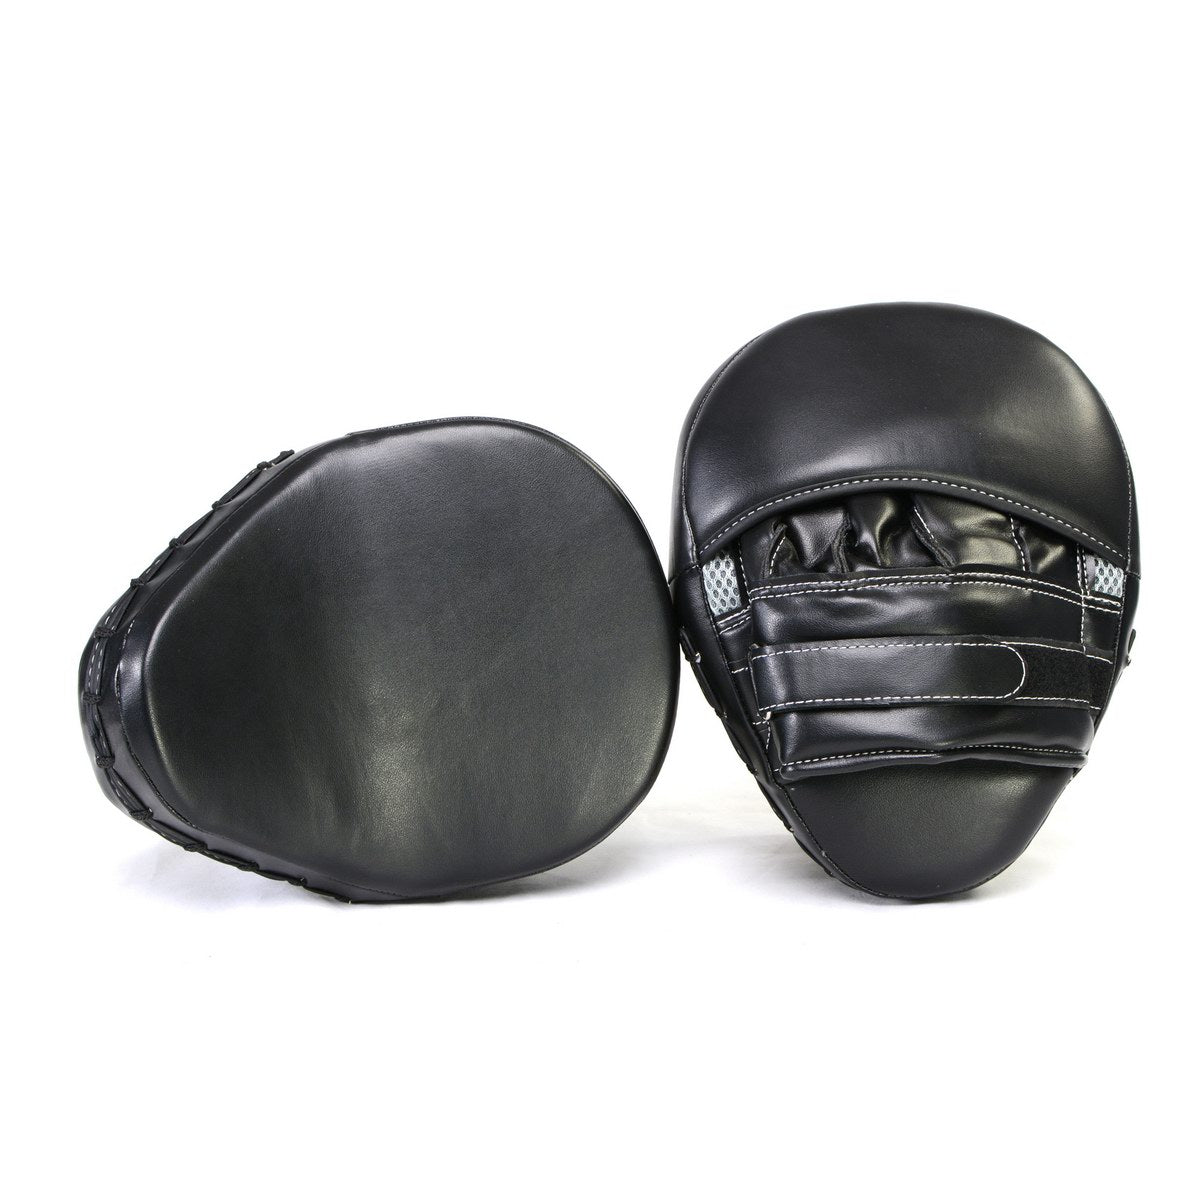 X Fitness XF8000 Curved Boxing MMA Punching Mitts-BLK/SILVER